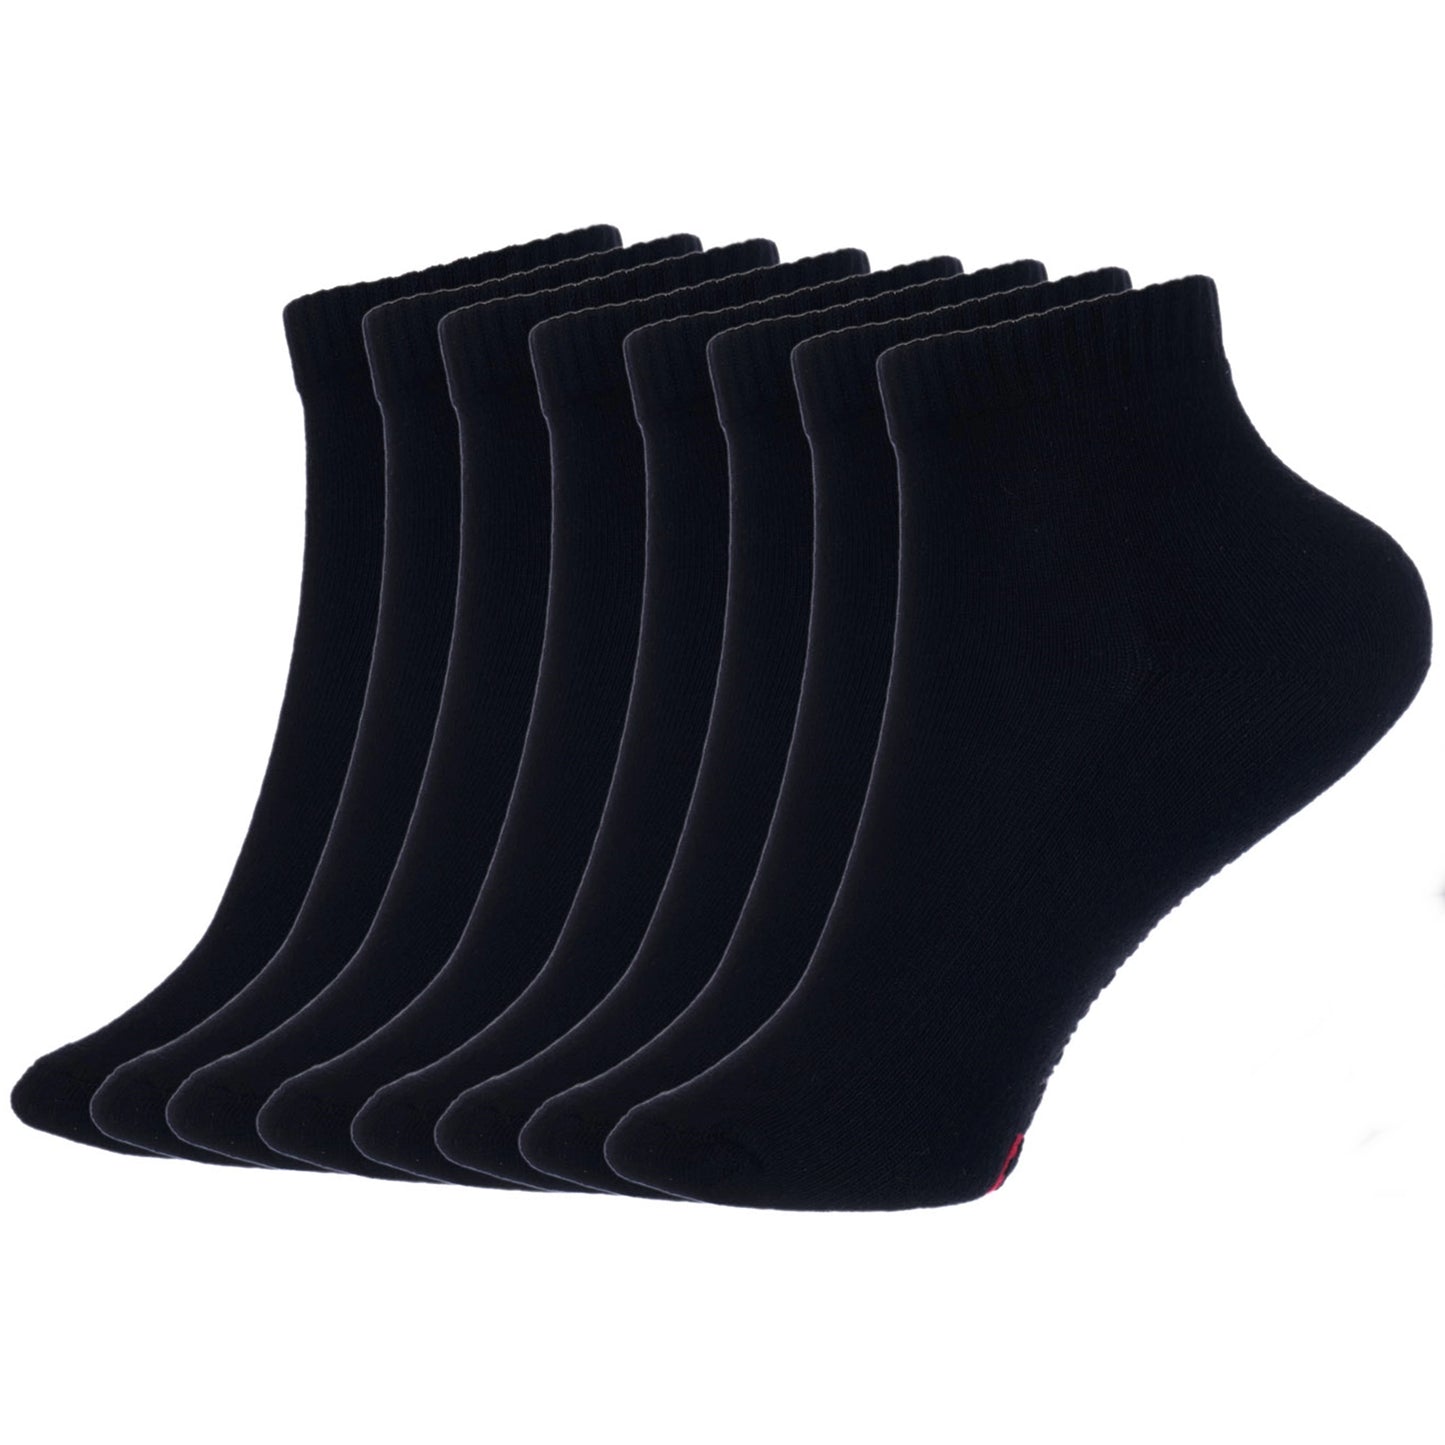 8 Pack Low Cut Ankle Athletic Socks